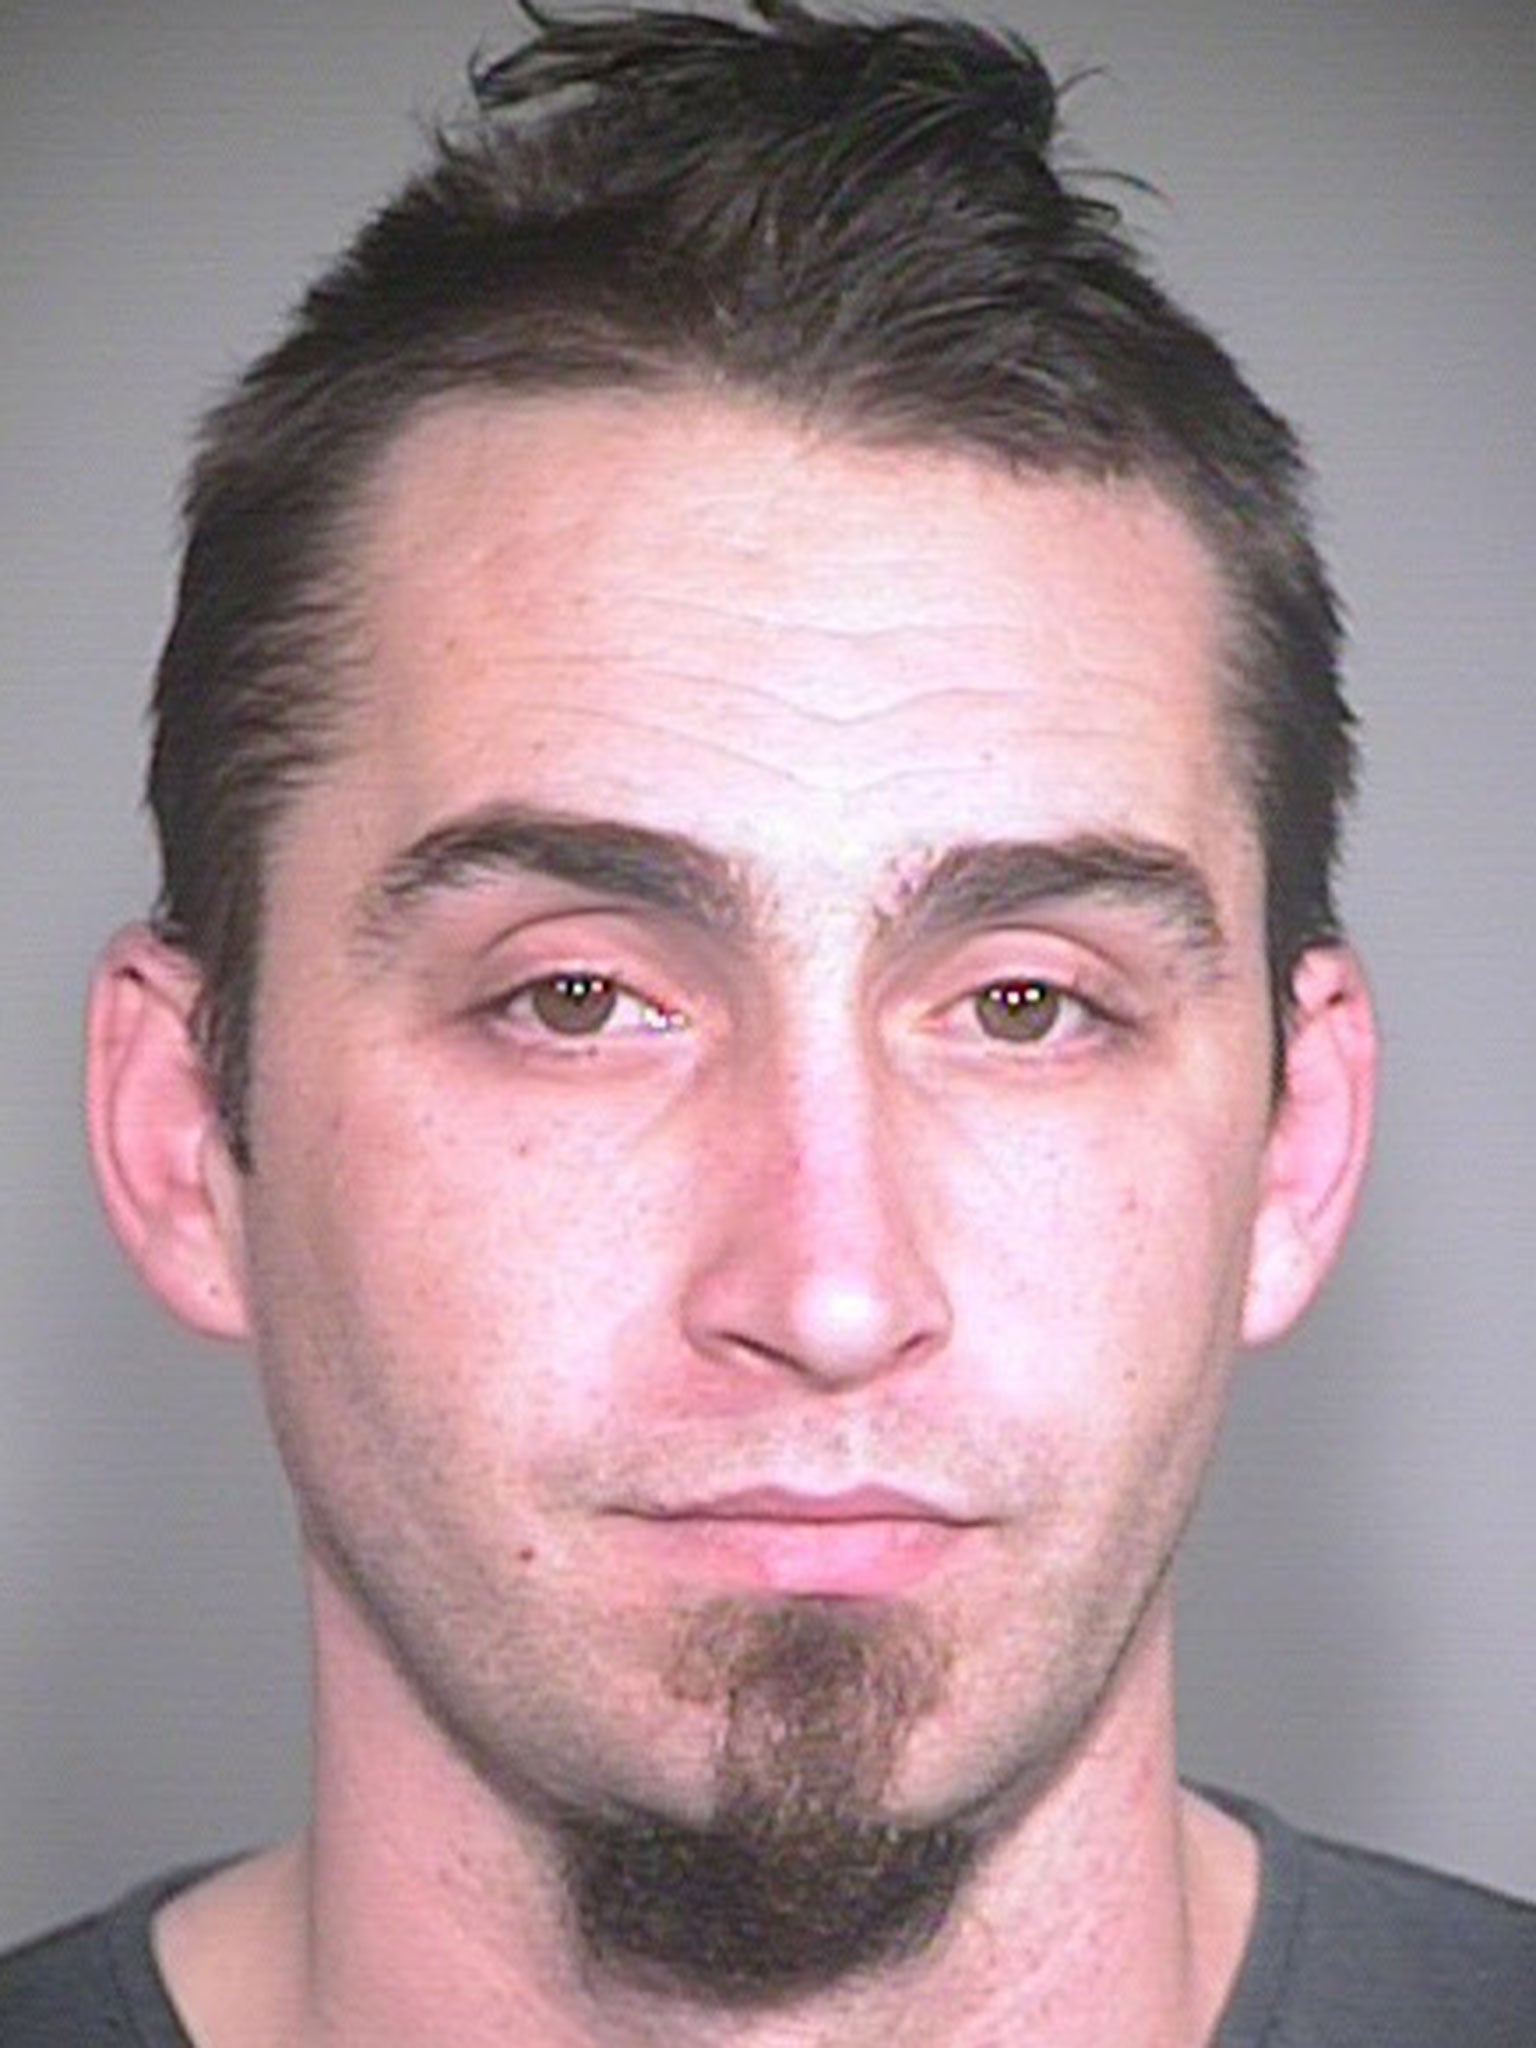 David Kalac, 33, who police say is a suspect in the killing of a woman in Port Orchard, Washington